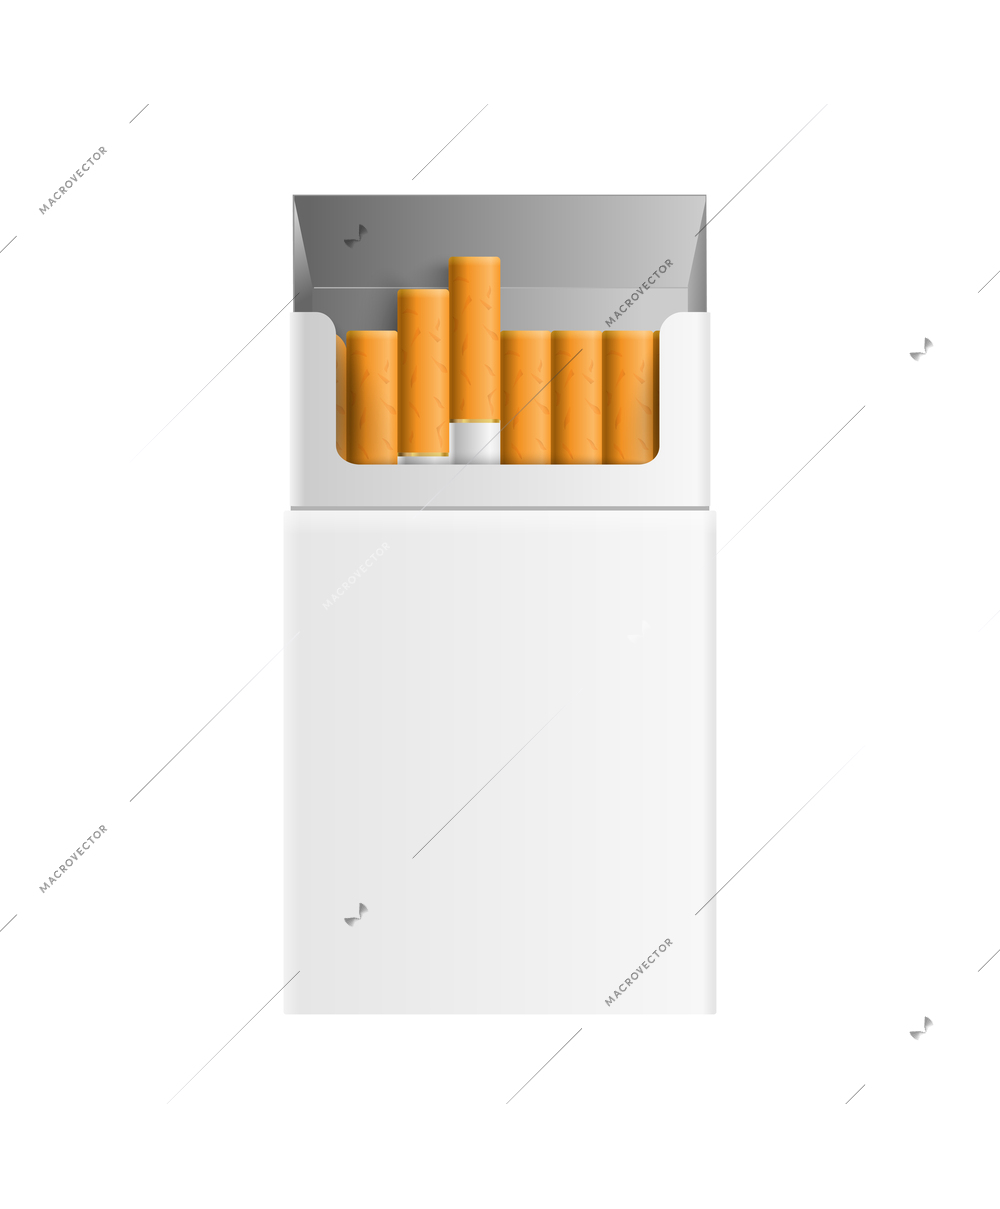 Blank cigarettes pack front view realistic vector illustration